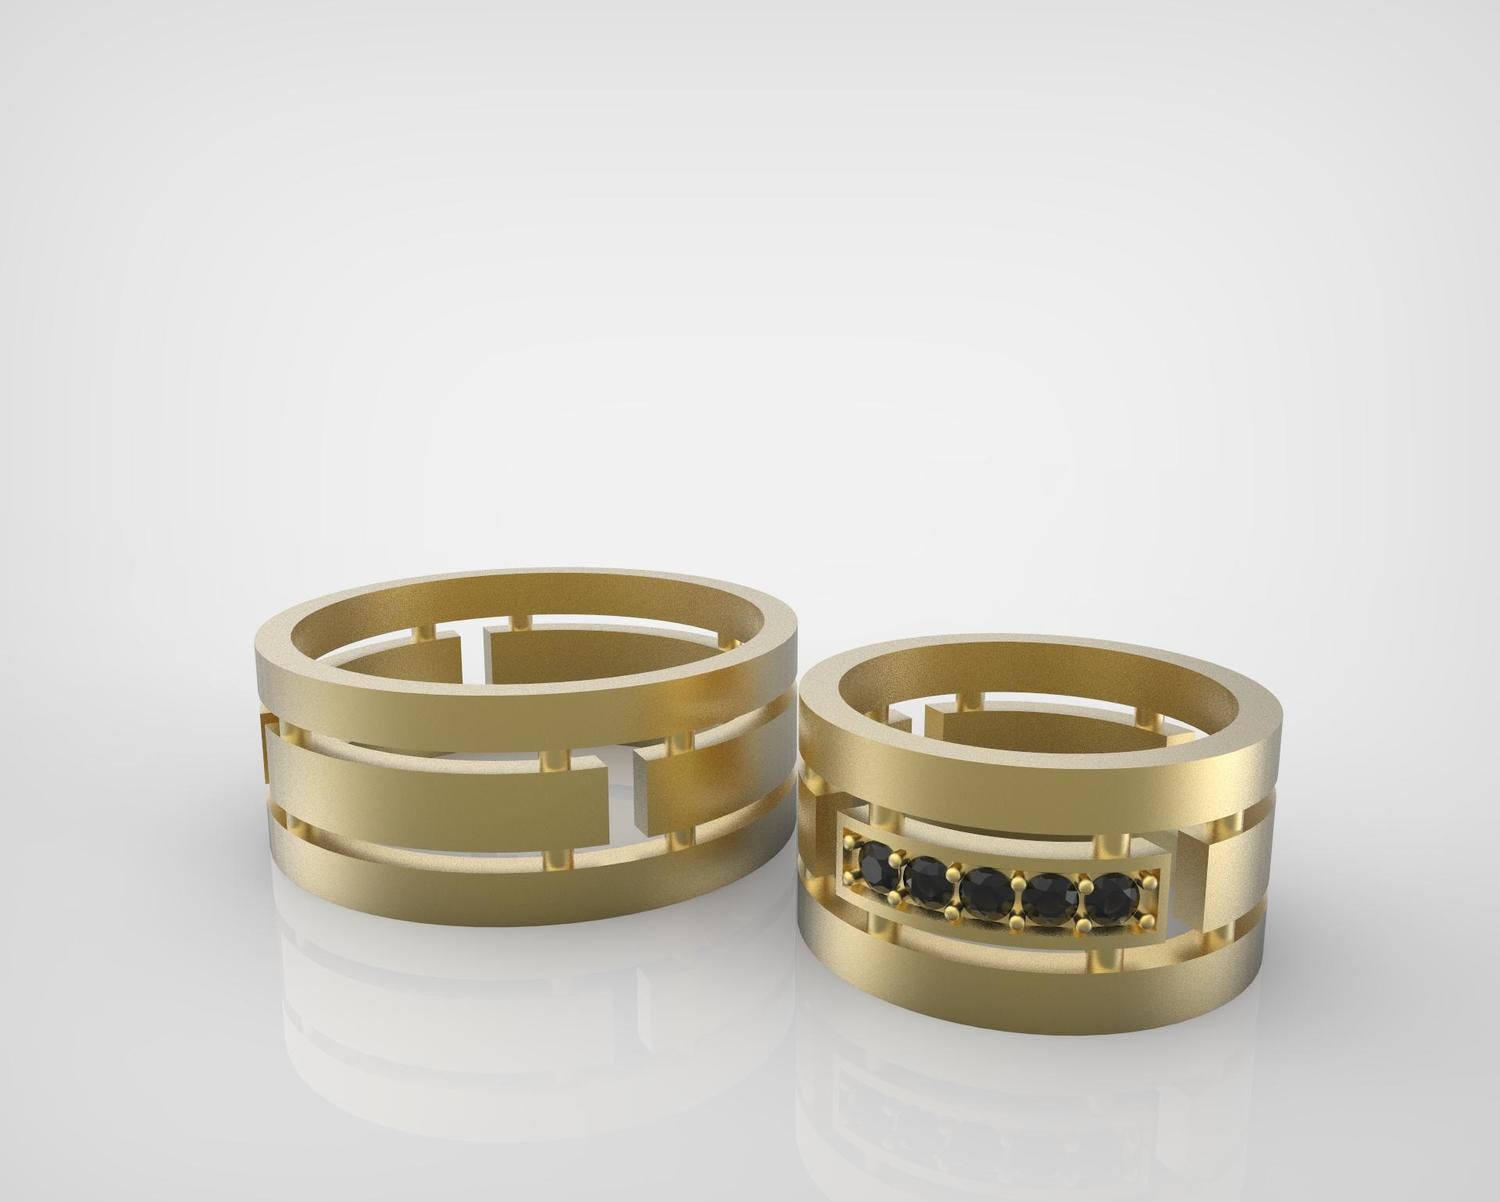 3D Model of Wedding Ring with Diamonds